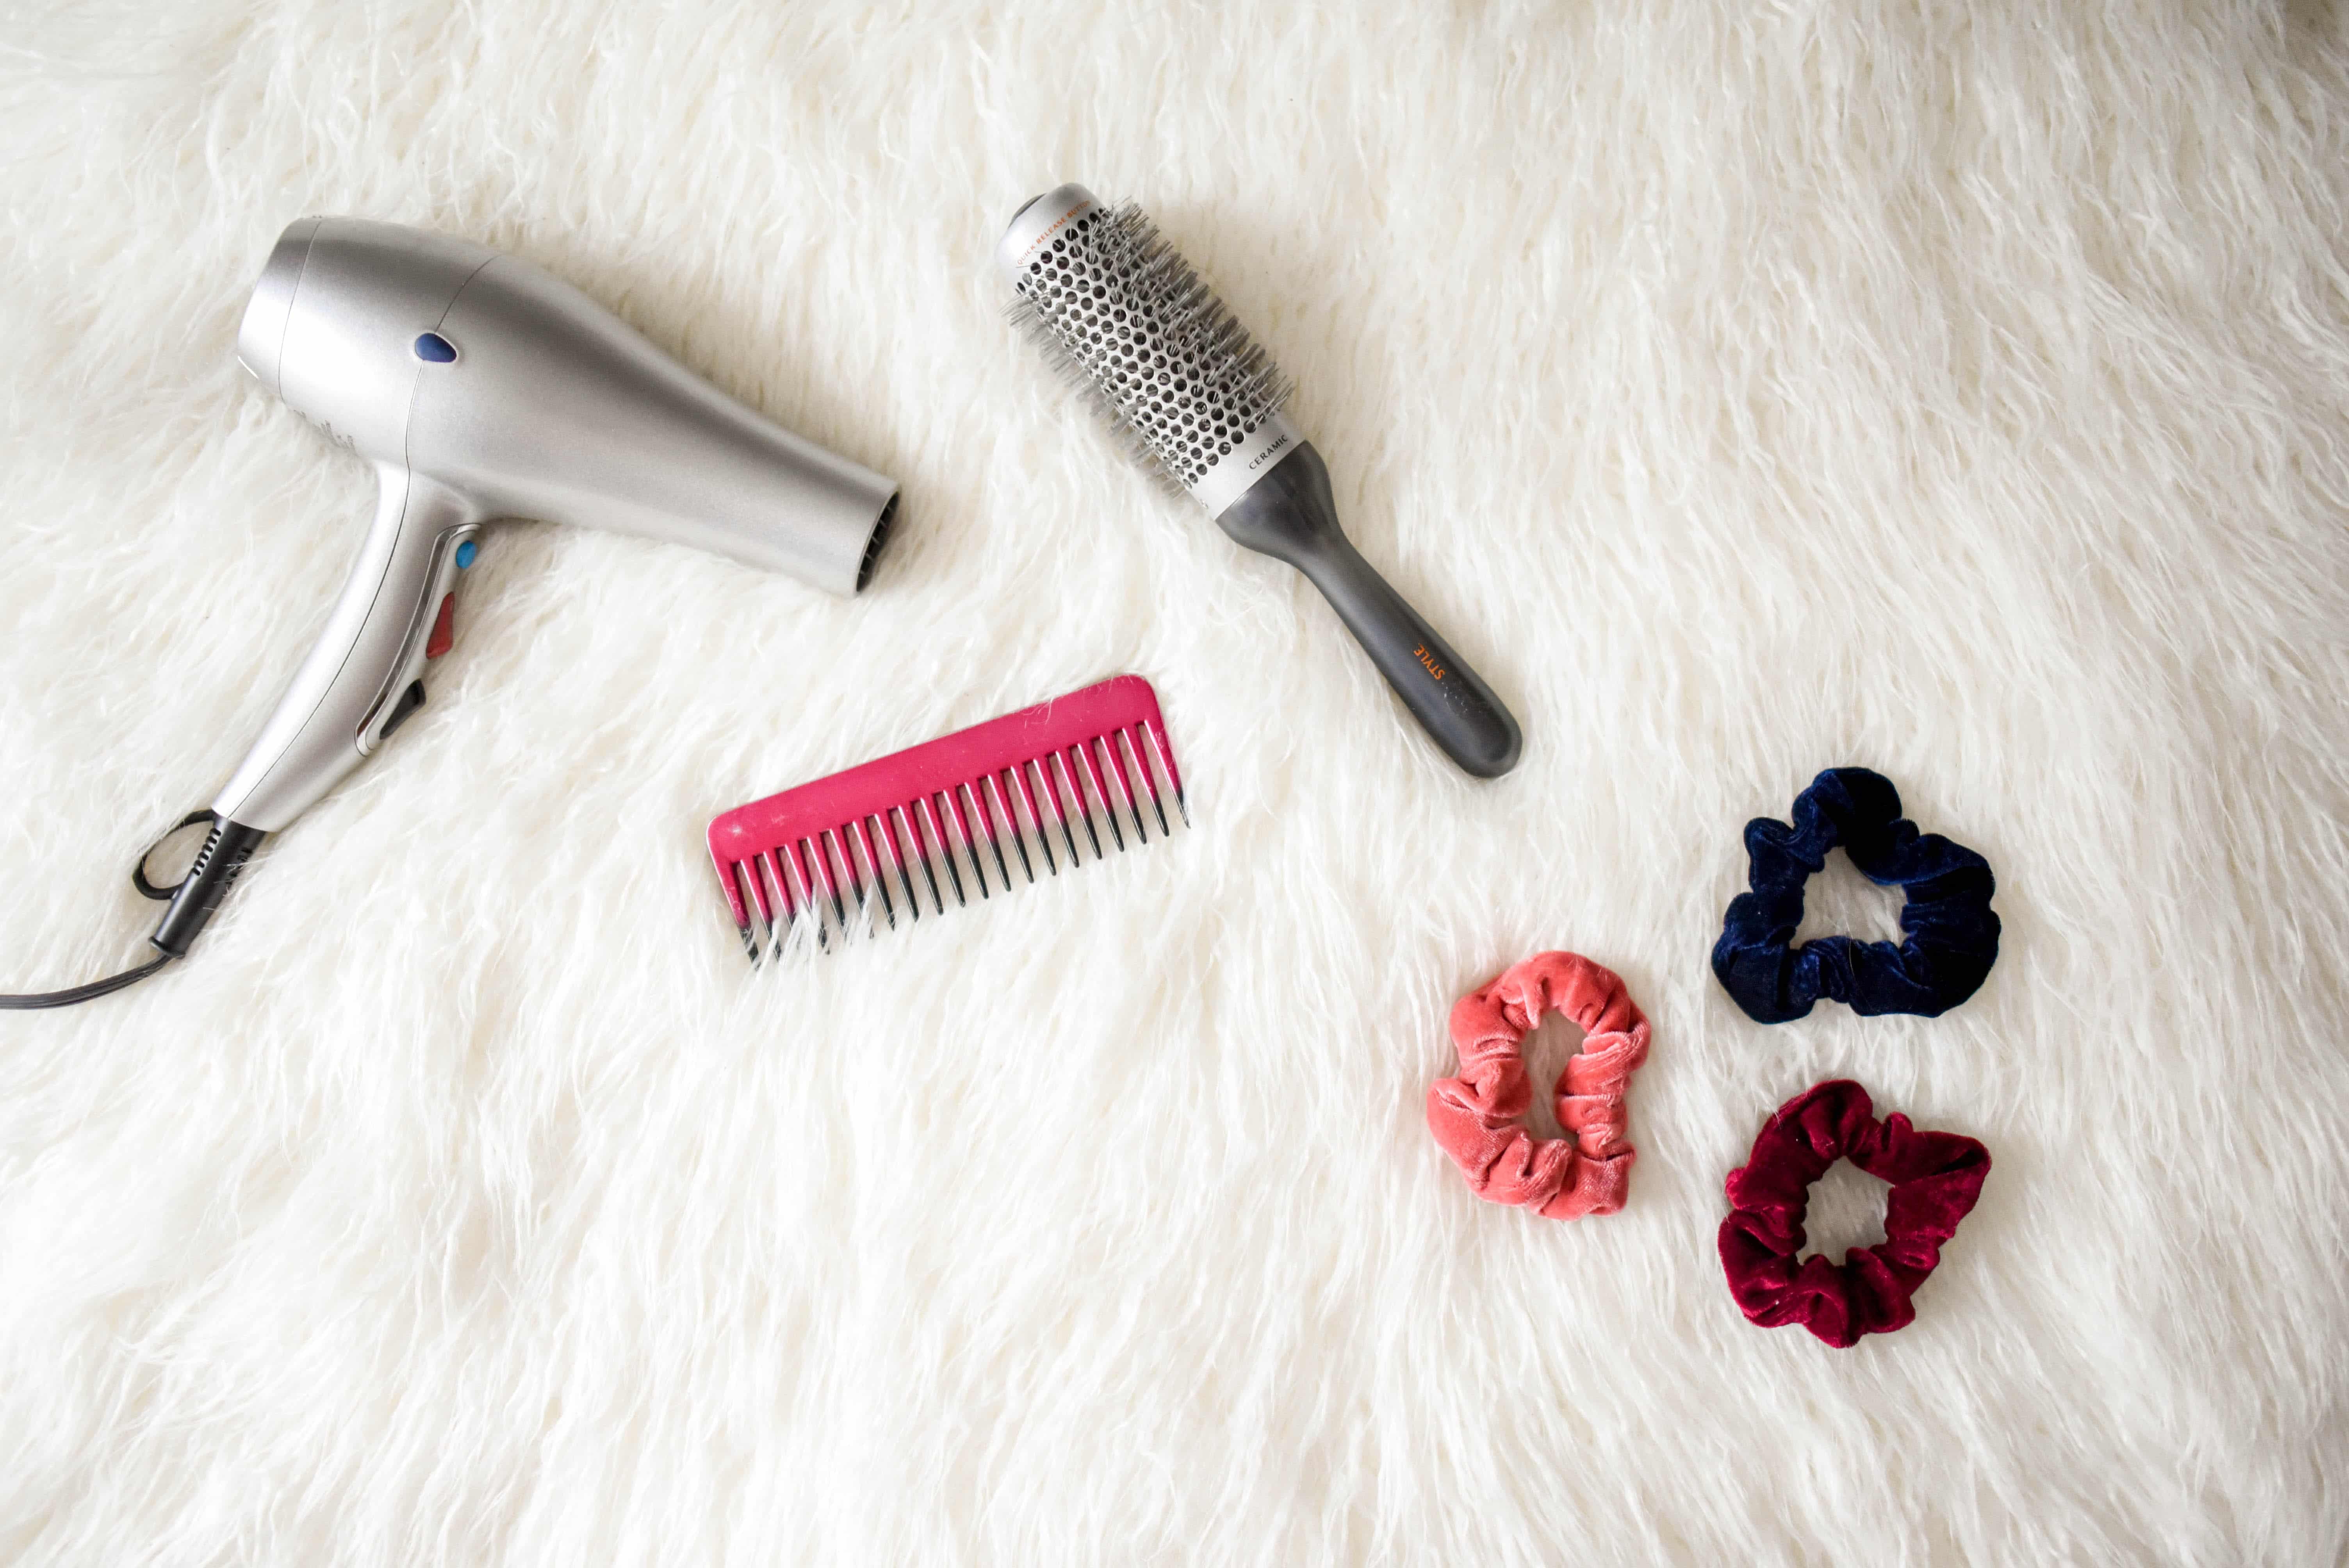 The Ultimate Hair Care Essentials: My Top 6 Must-Haves